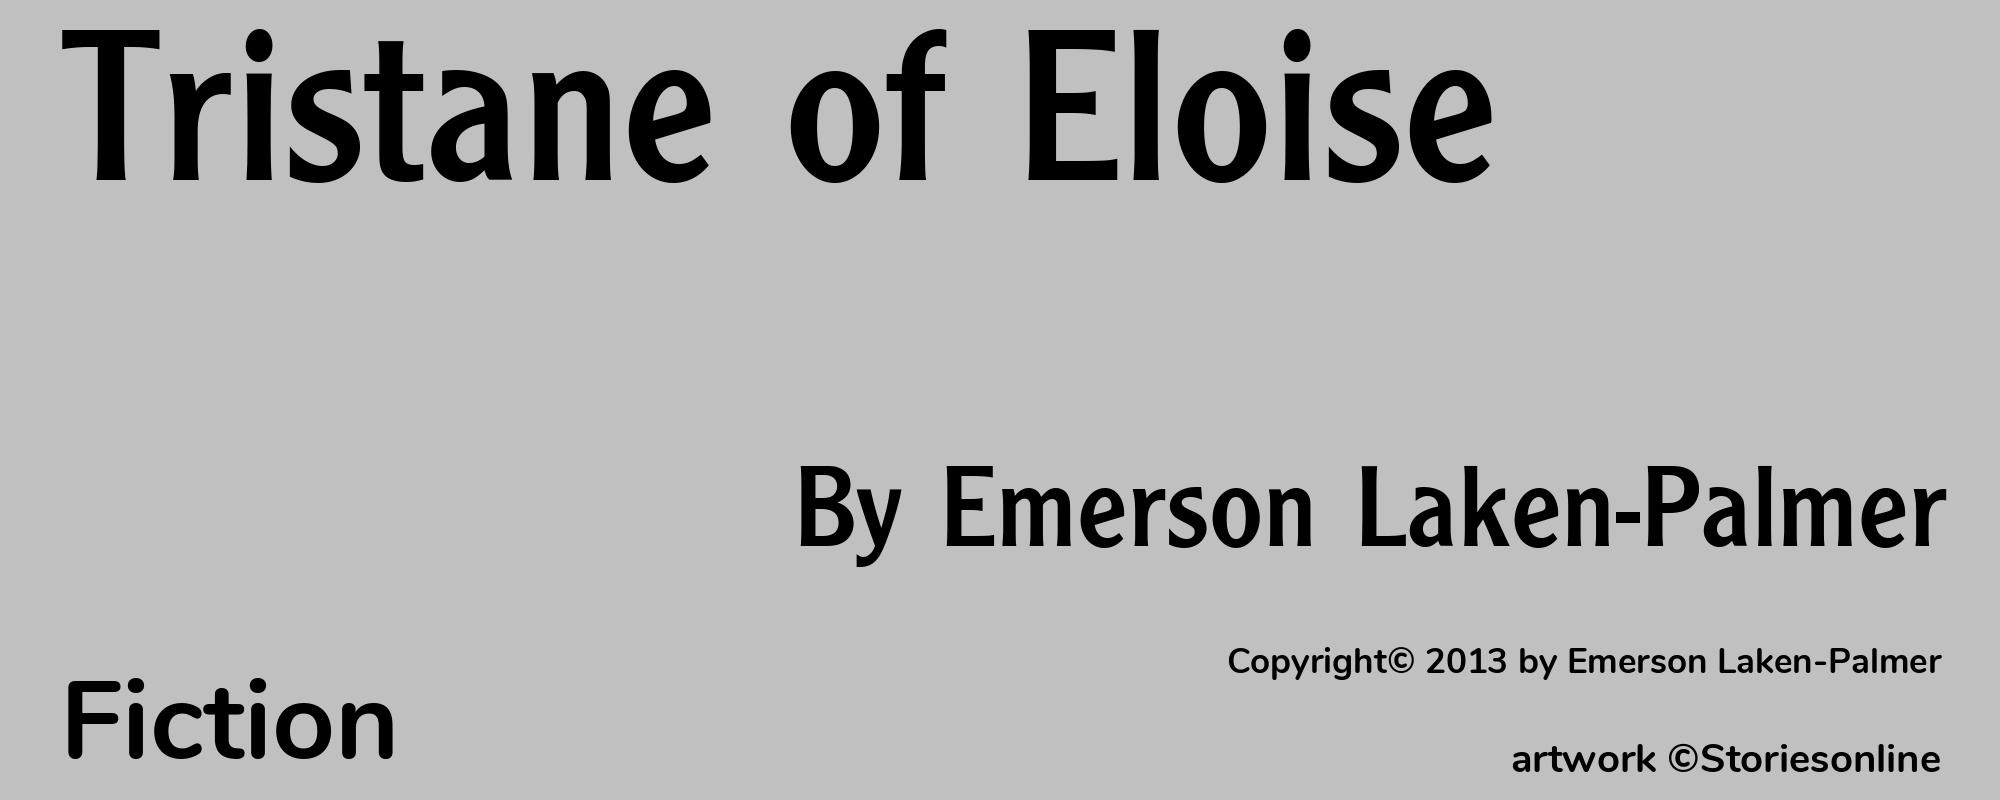 Tristane of Eloise - Cover